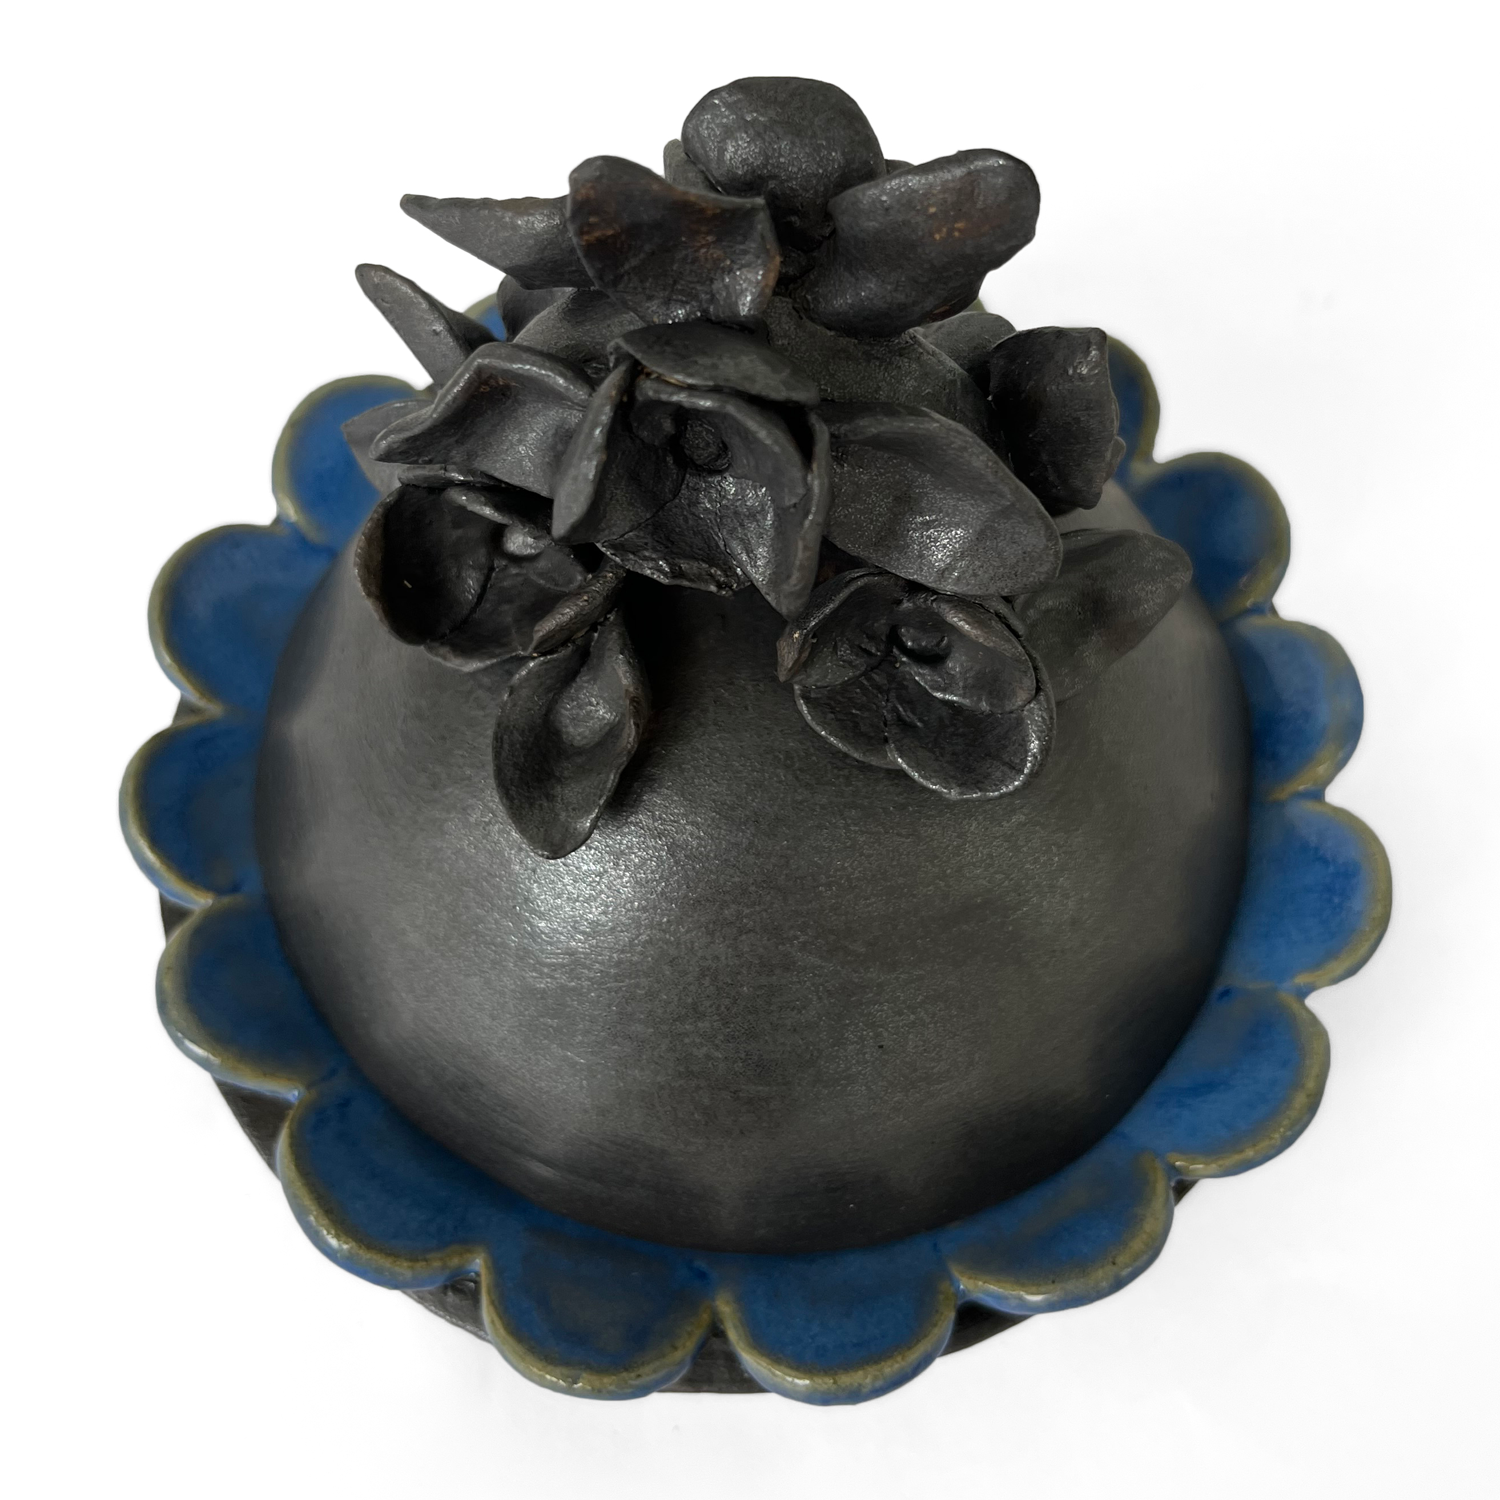 Mariana Bolanos Inclan: Flower Butter Dish Product Image 2 of 2